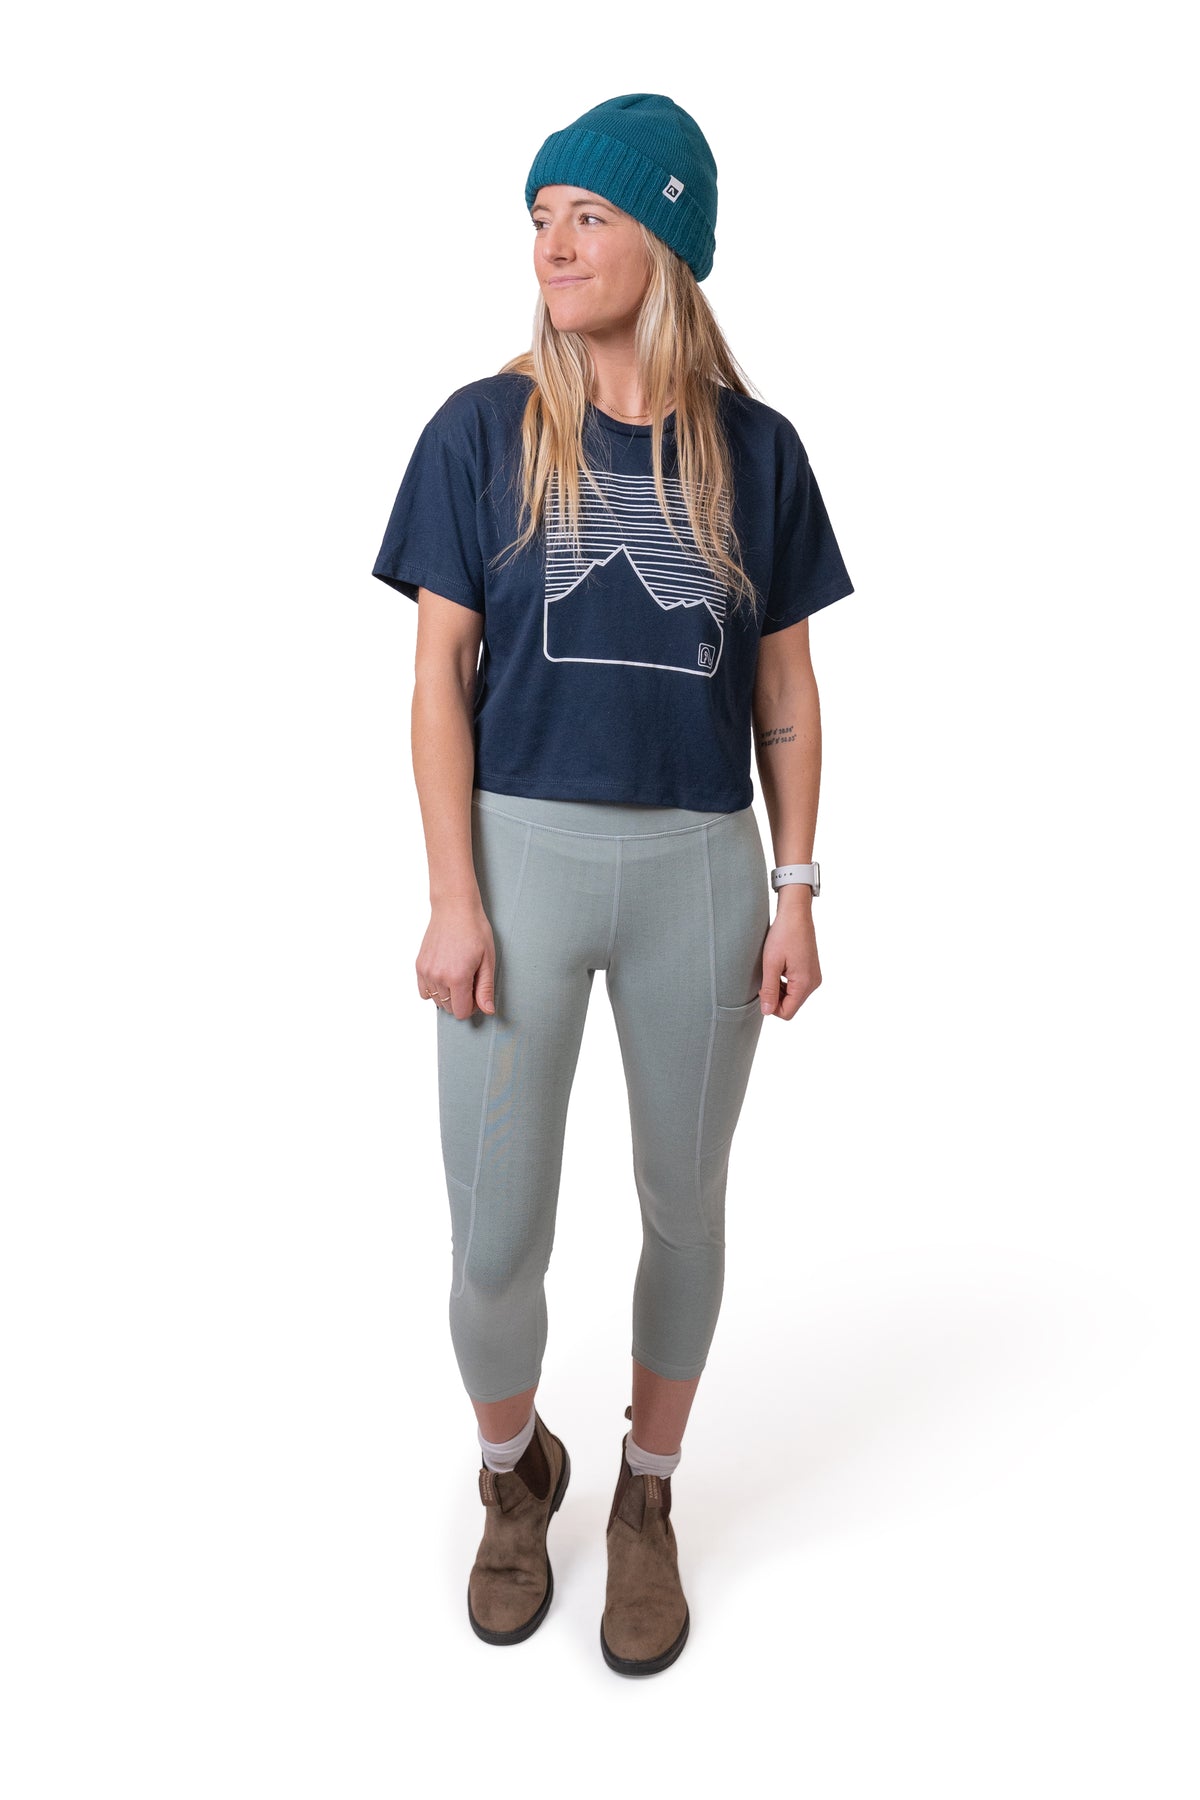 Hiking Leggings: Our Top 9 Picks for All-Day Comfort & Style on the Trail